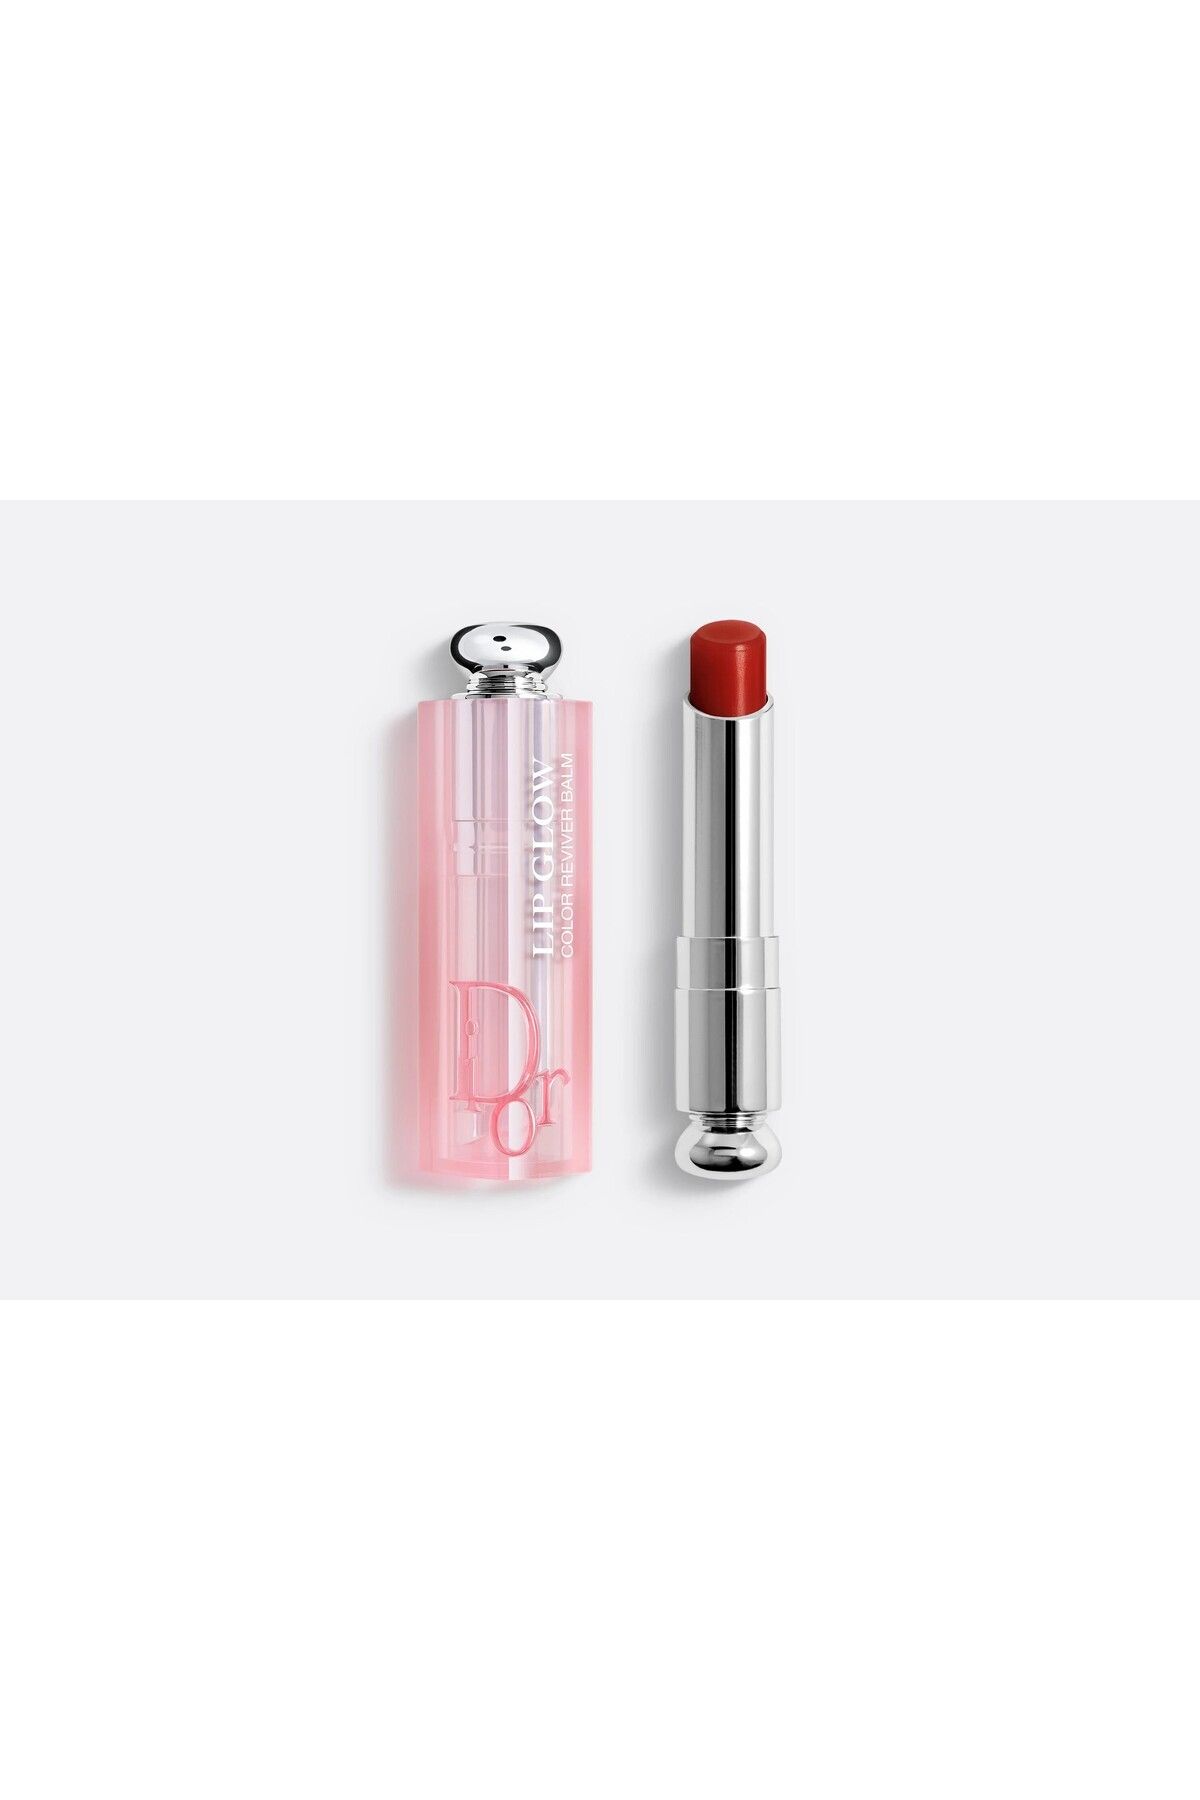 Dior ADDİCT LİP GLOW - 24 DAYS EFFECTİVE REVİTALİZİNG WİTH CHERRY OİL DEMBA2379